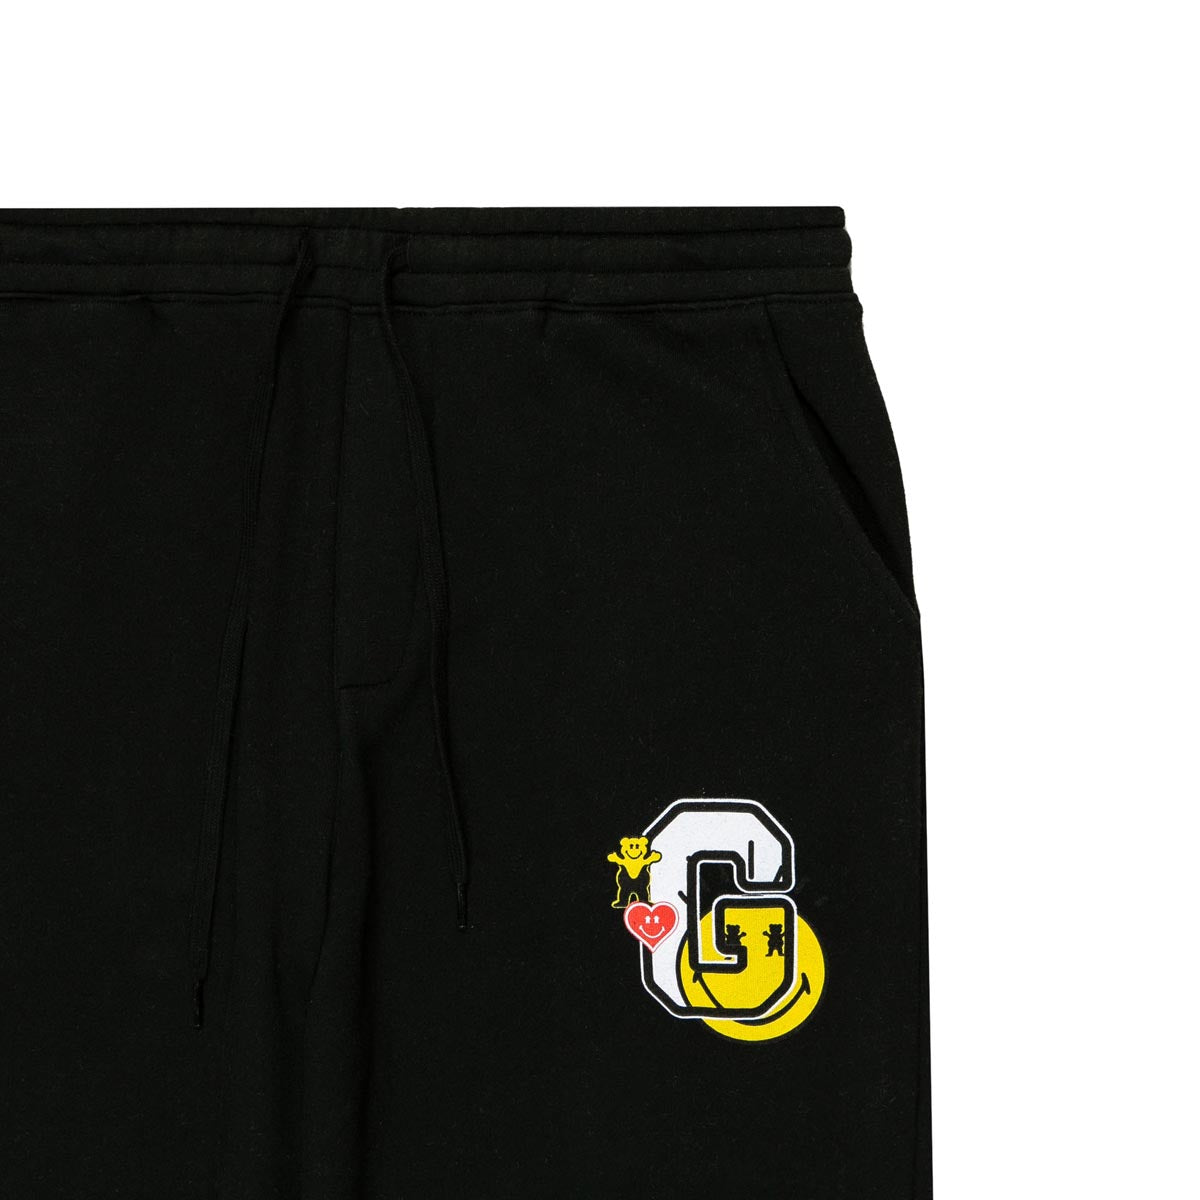 Grizzly x Smiley World Sweat Pants - Black image 5